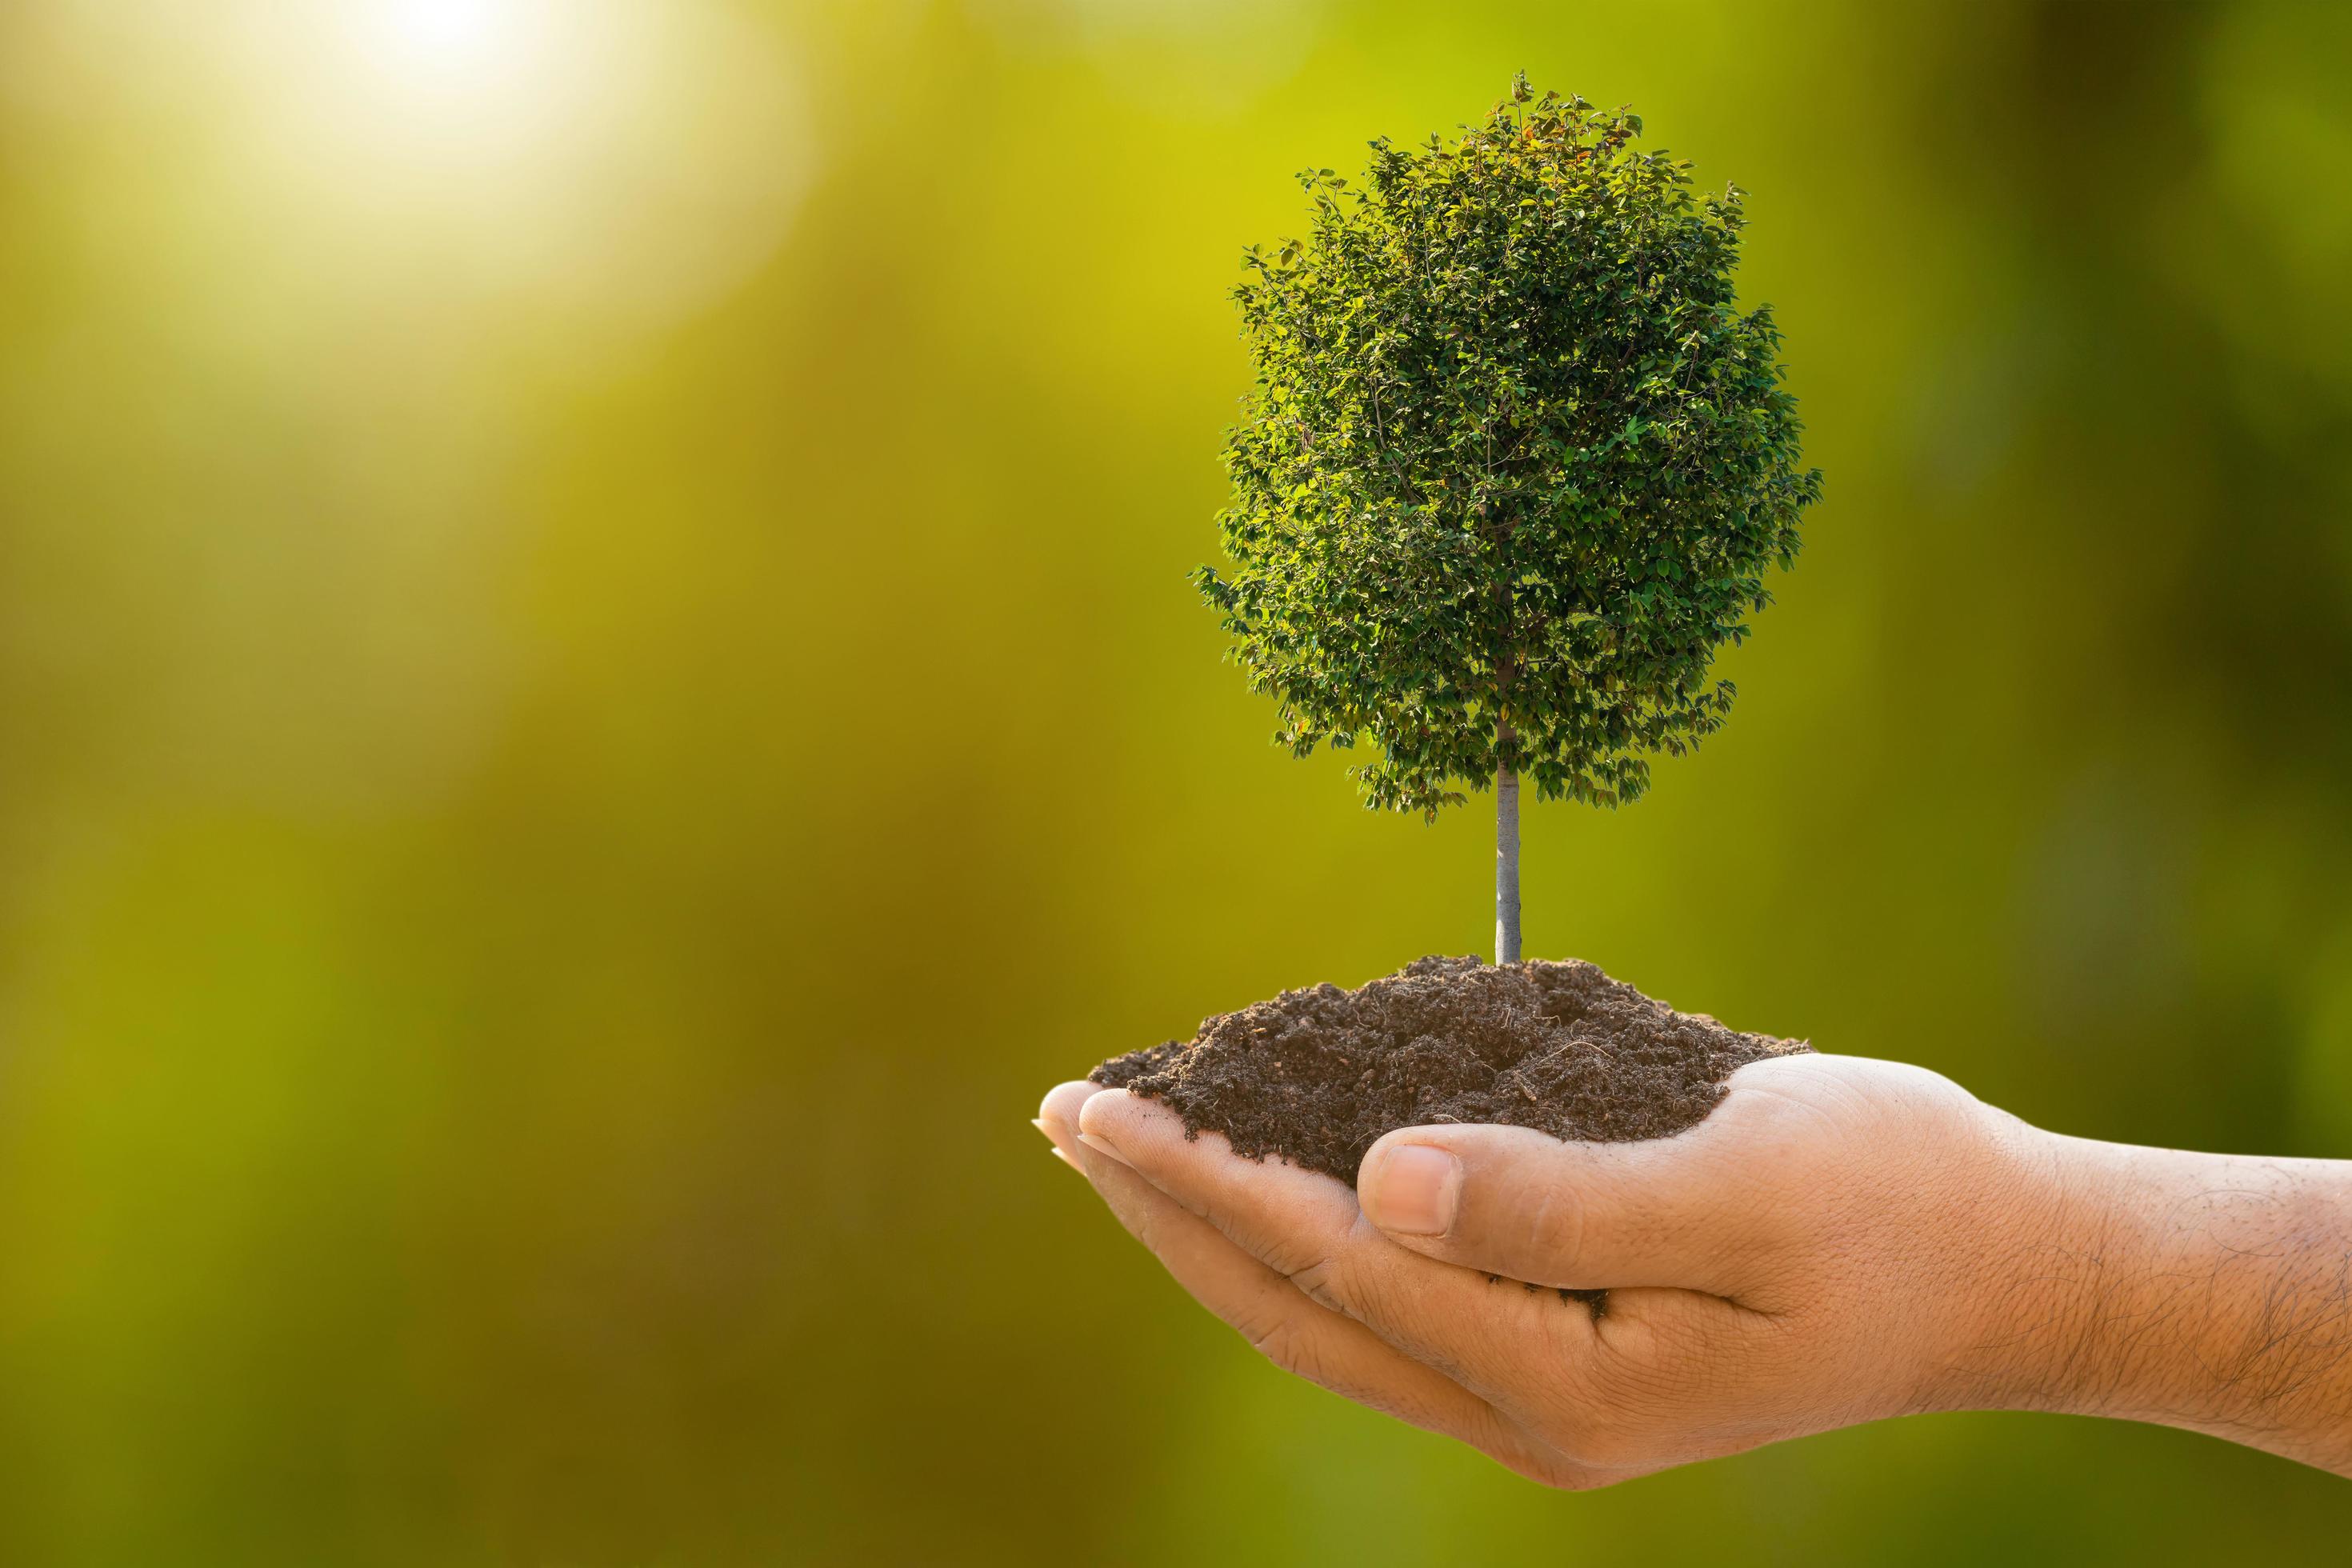 Hand holding soil and tropical tree young on green garden blur background.  Growth and environment concept 6305515 Stock Photo at Vecteezy